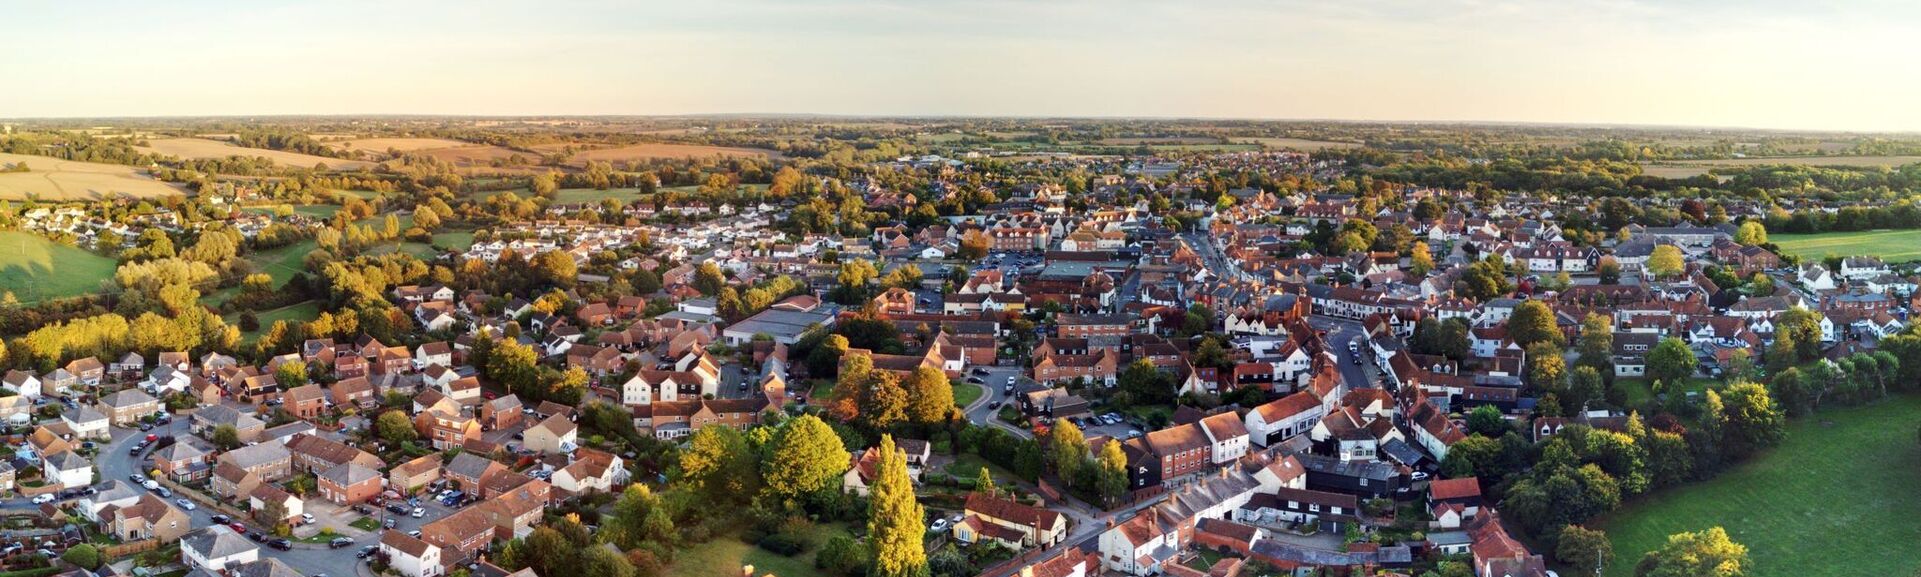 Aerial view of Essex - Great Dunmow